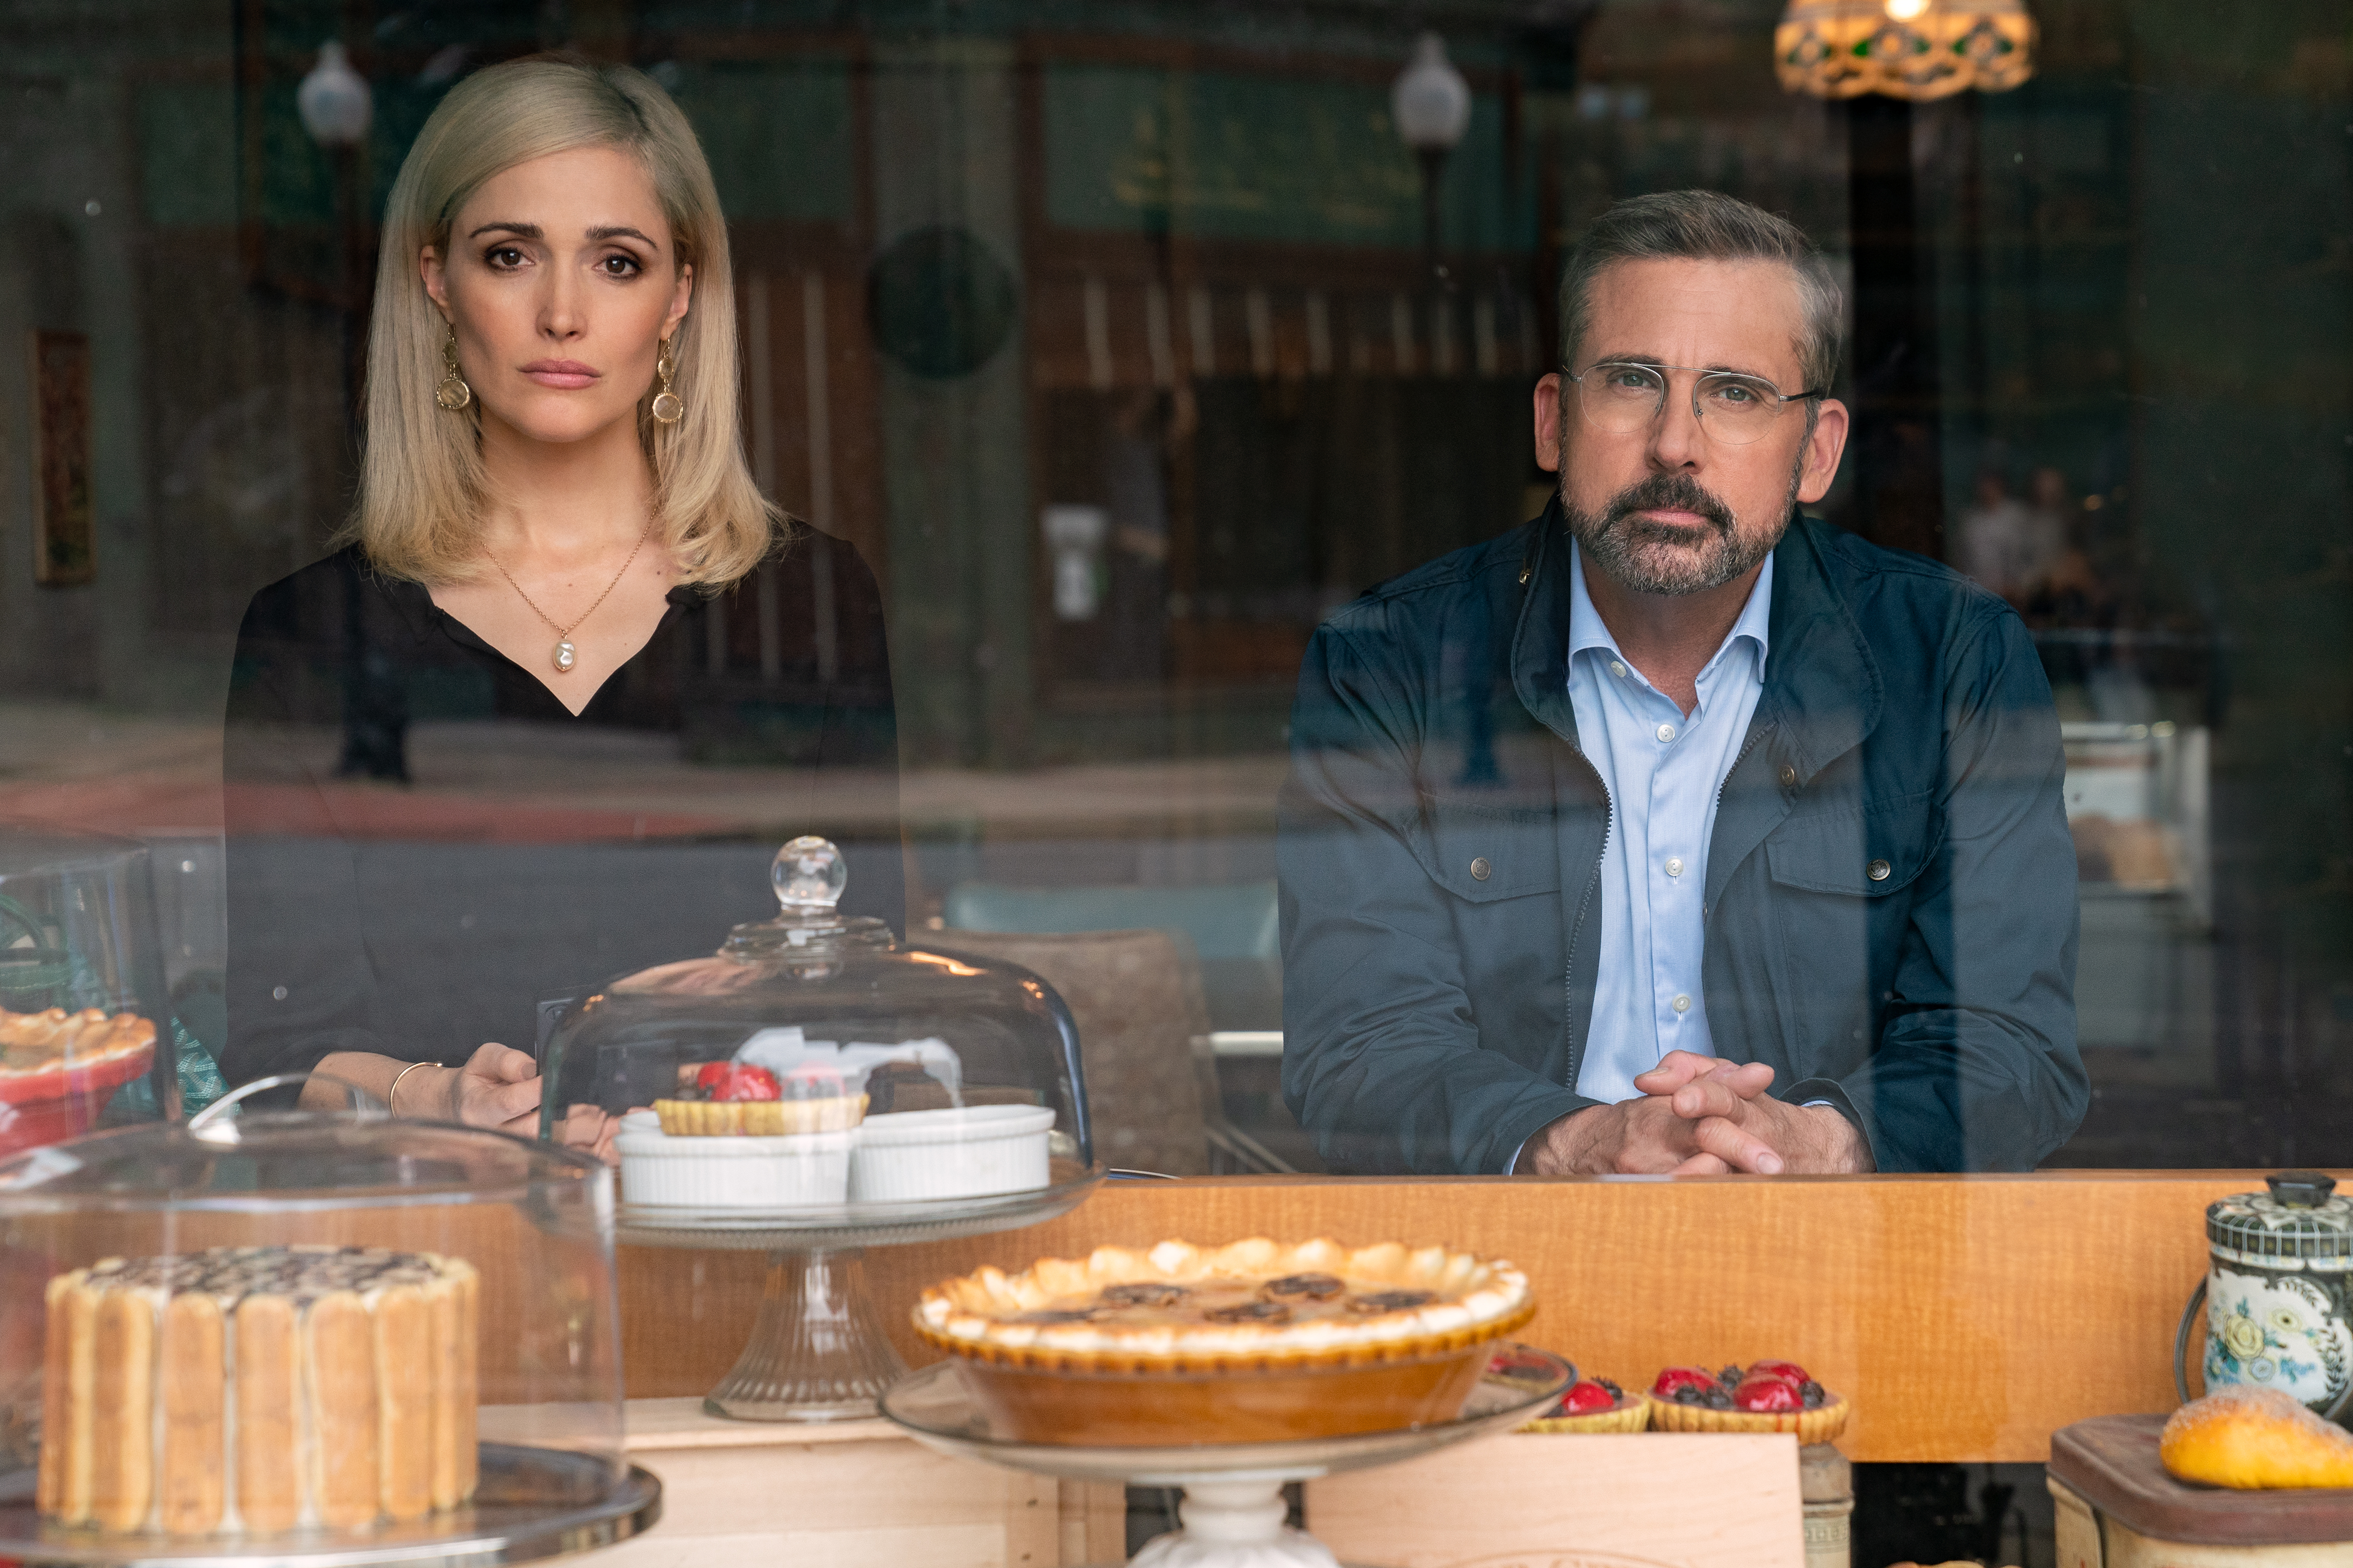 Rose Byrne and Steve Carell in Irresistible (Daniel McFadden—2020 Focus Features)